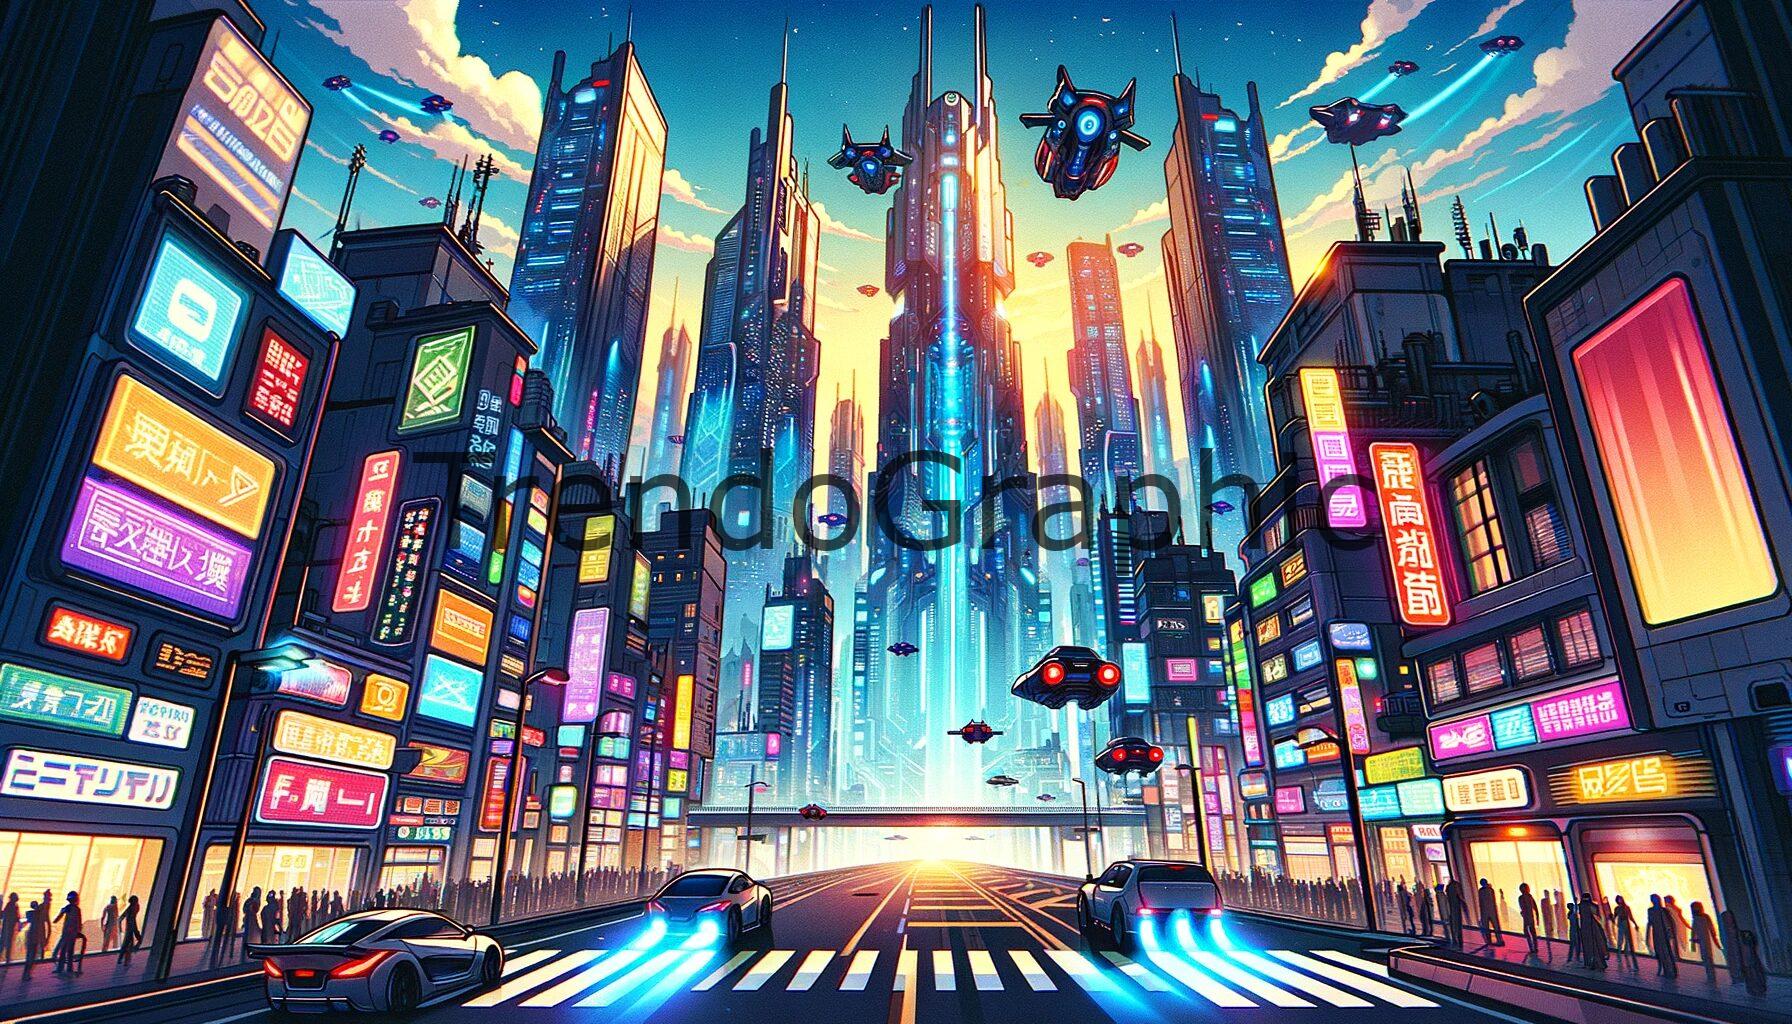 Futuristic Anime Cityscape: A World of Neon-Lit Skyscrapers and Flying Cars